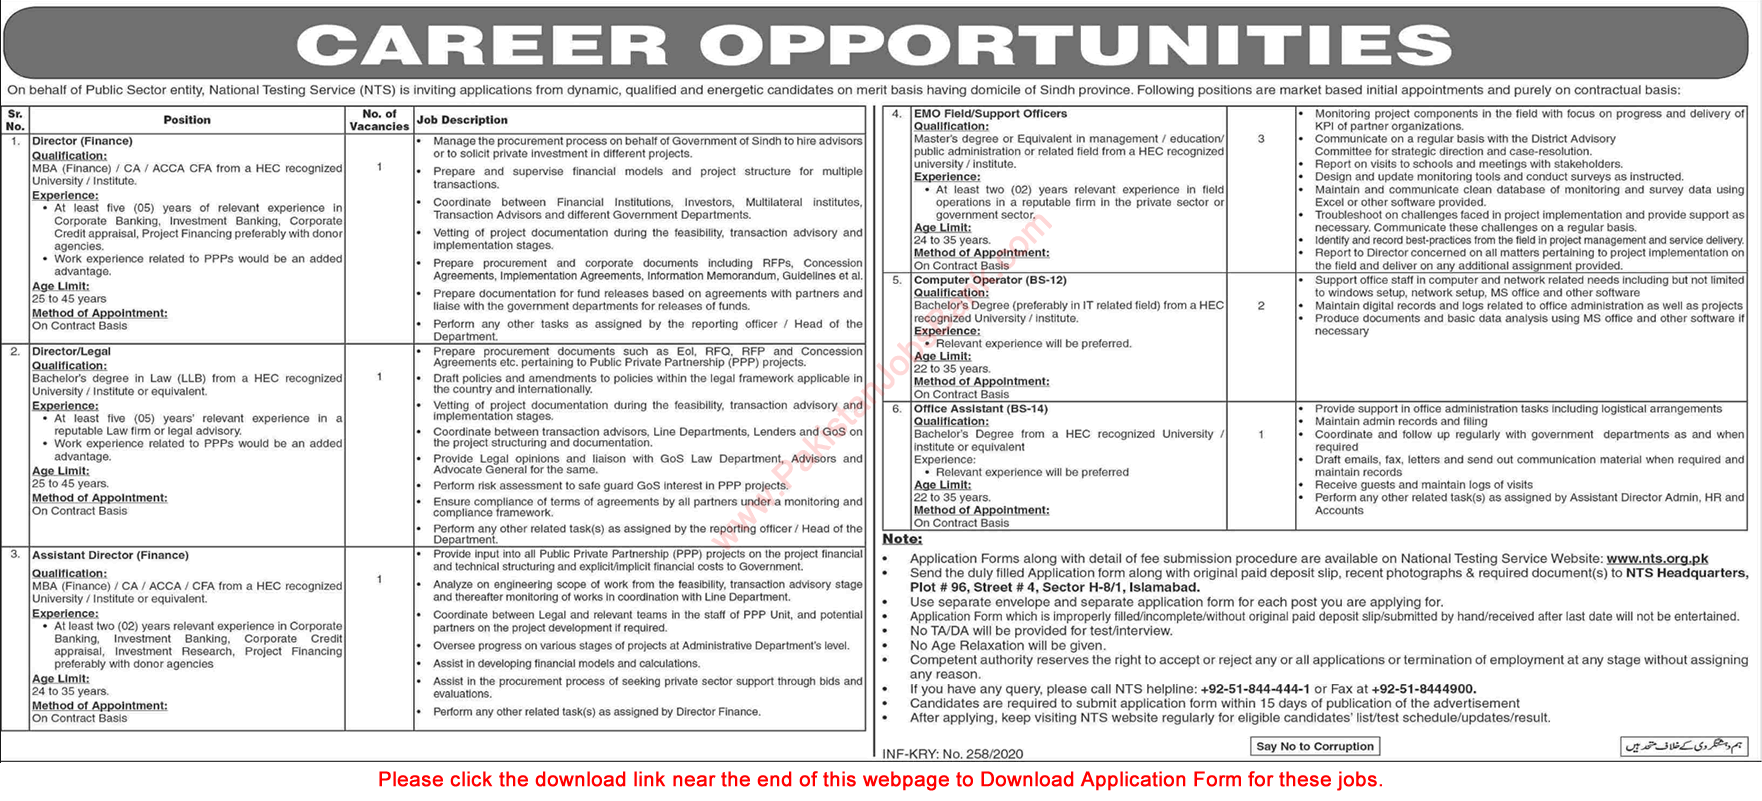 Public Sector Organization Jobs 2020 NTS Application Form Field Officers, Computer Operators & Others Latest